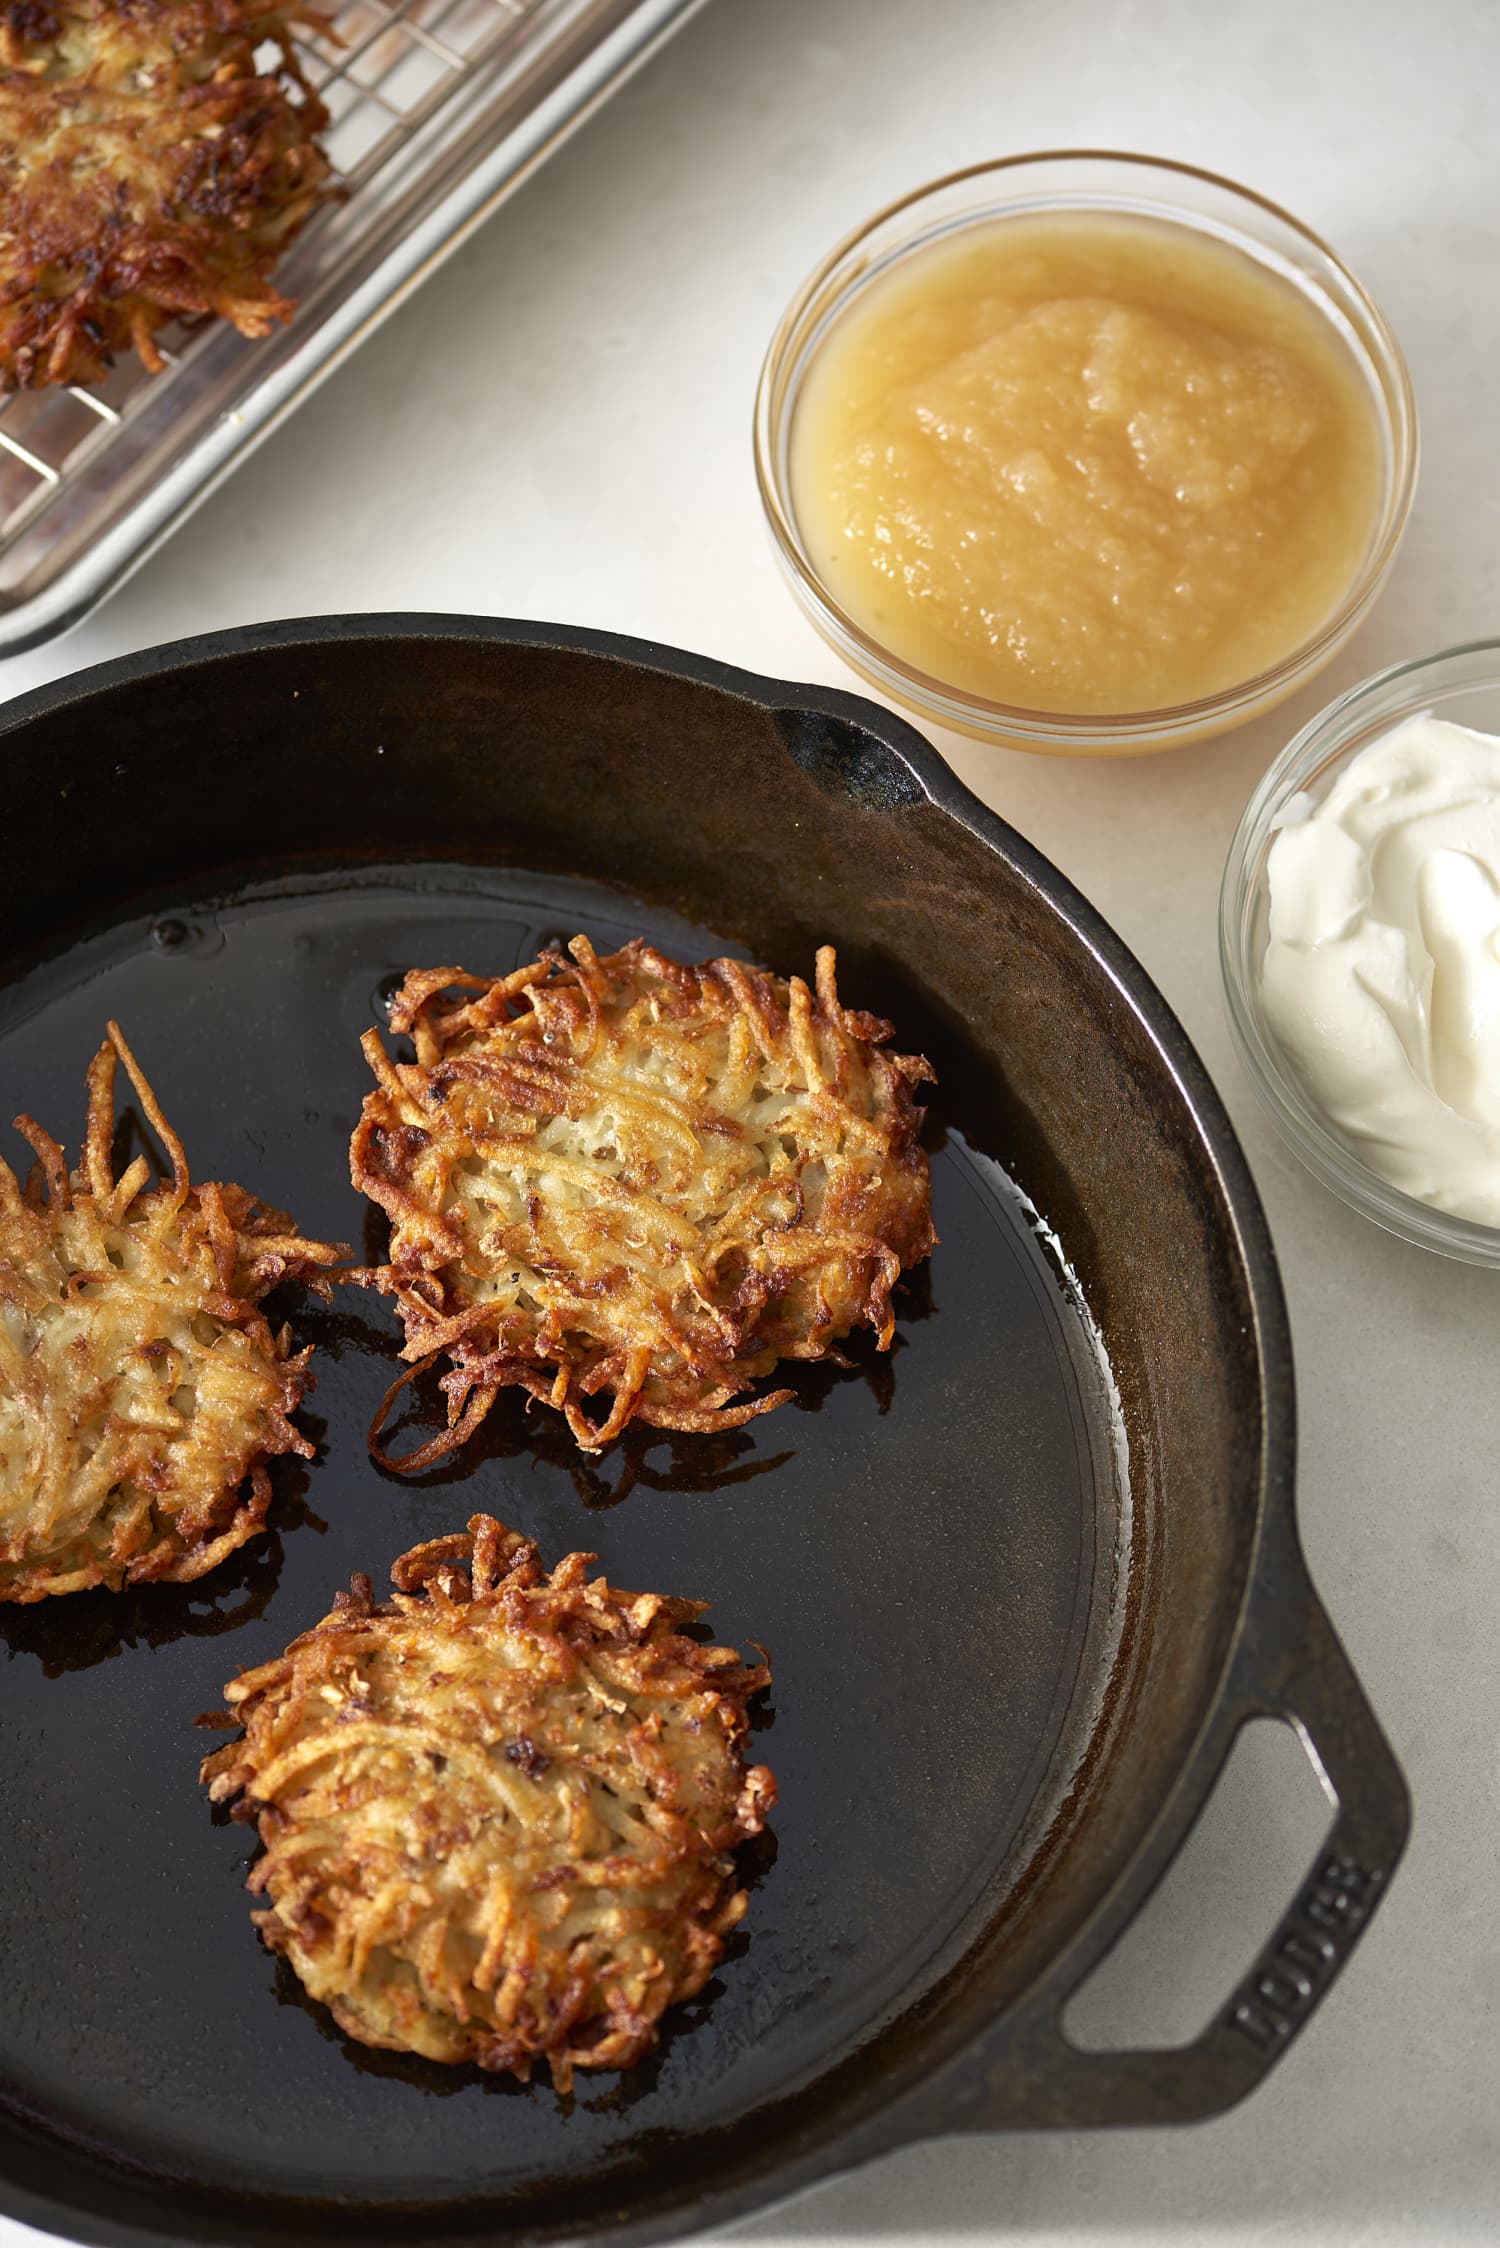 How To Make Classic Latkes: The Easiest, Simplest Method | Kitchn